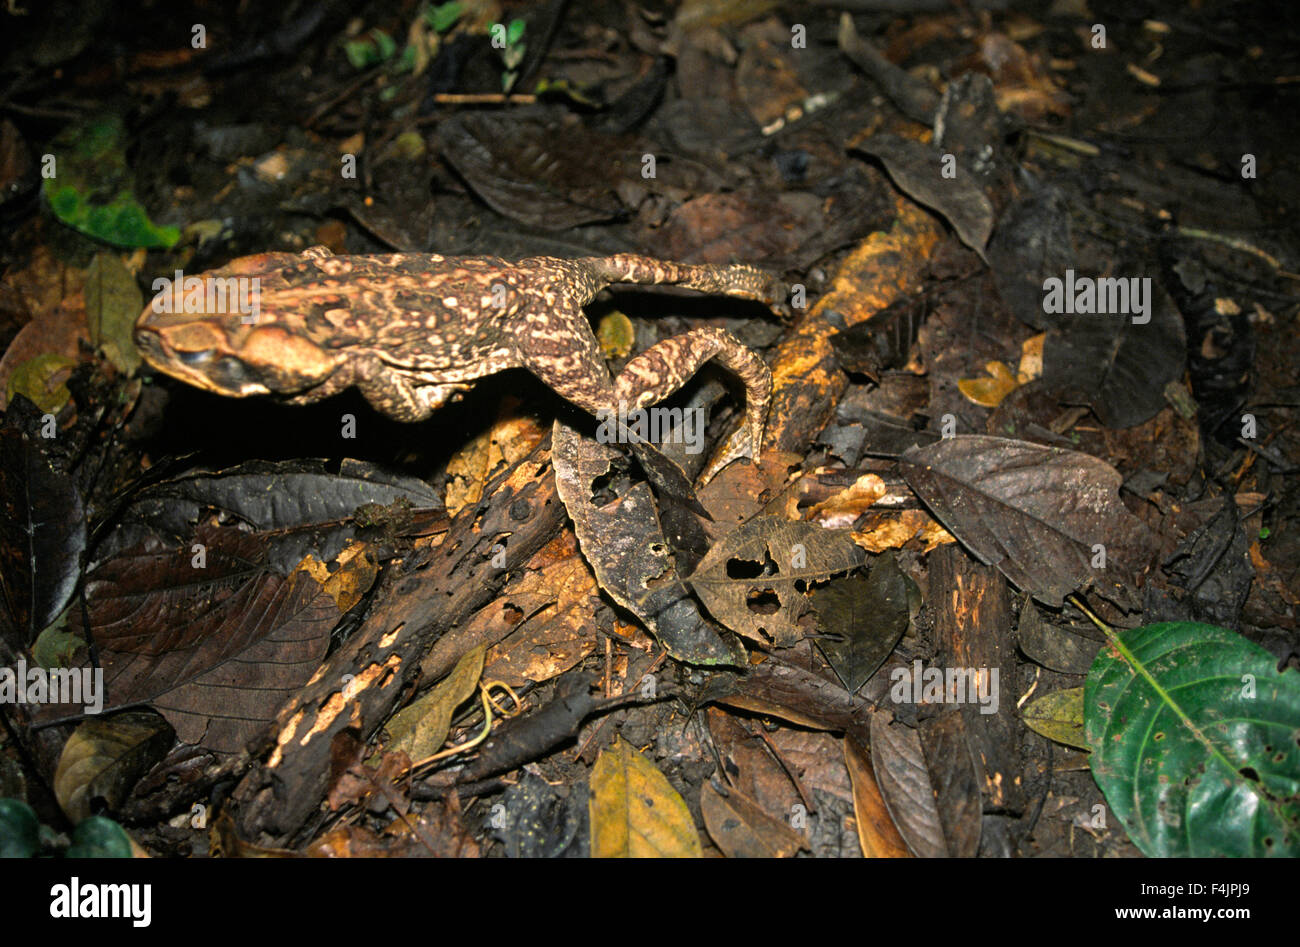 Jumping frog, high angle view Stock Photo